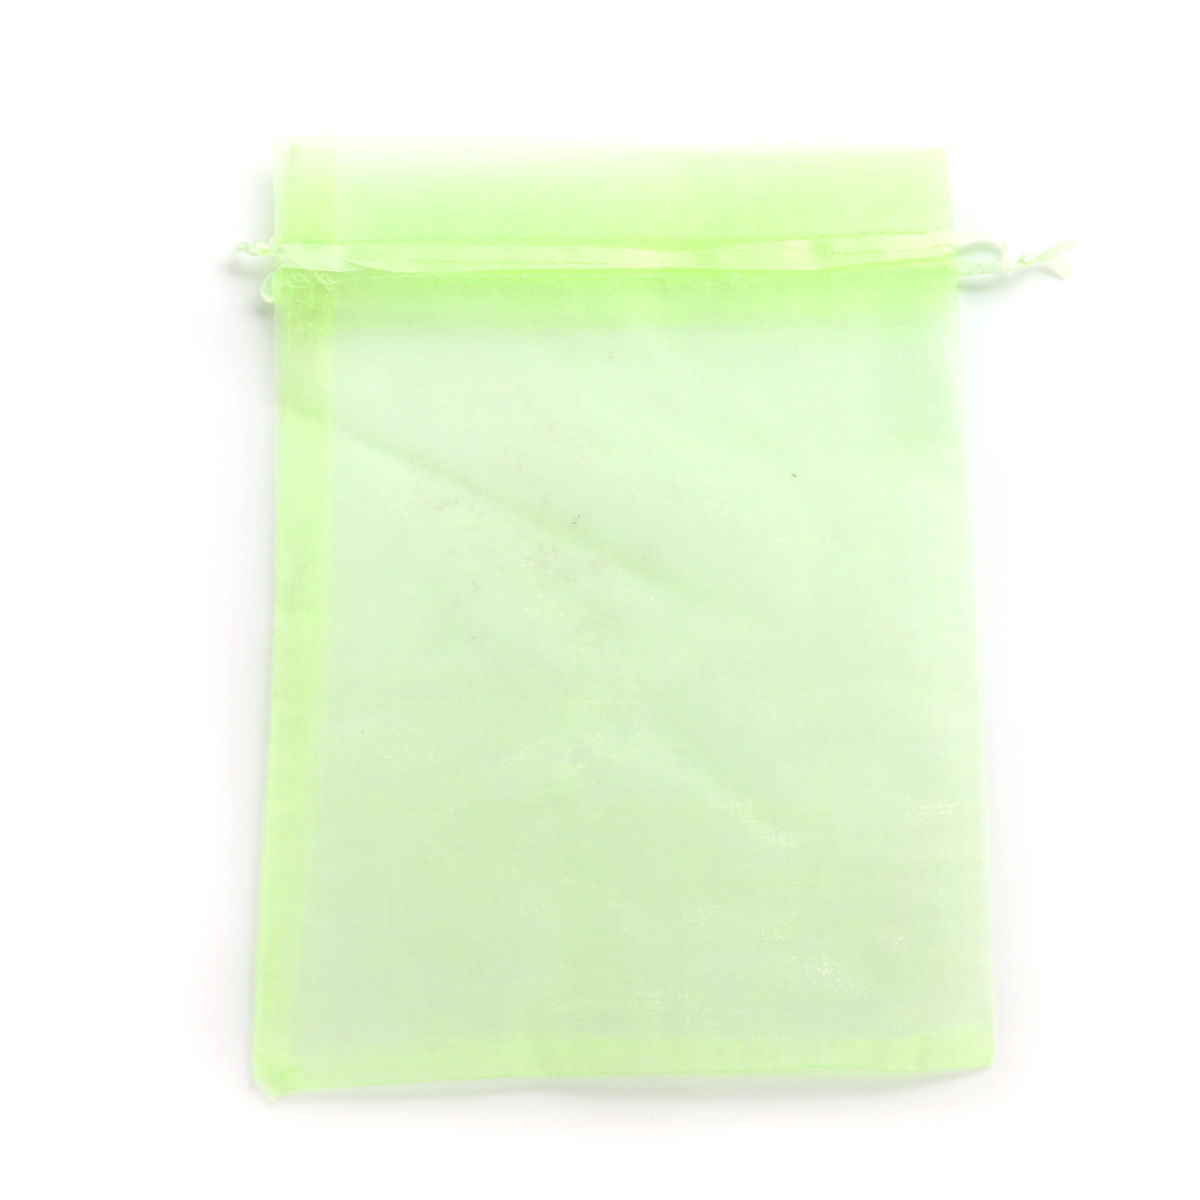 Picture of Wedding Gift Organza Jewelry Bags Drawstring Rectangle Fruit Green (Usable Space: 19x16cm) 23cm x 17cm, 20 PCs